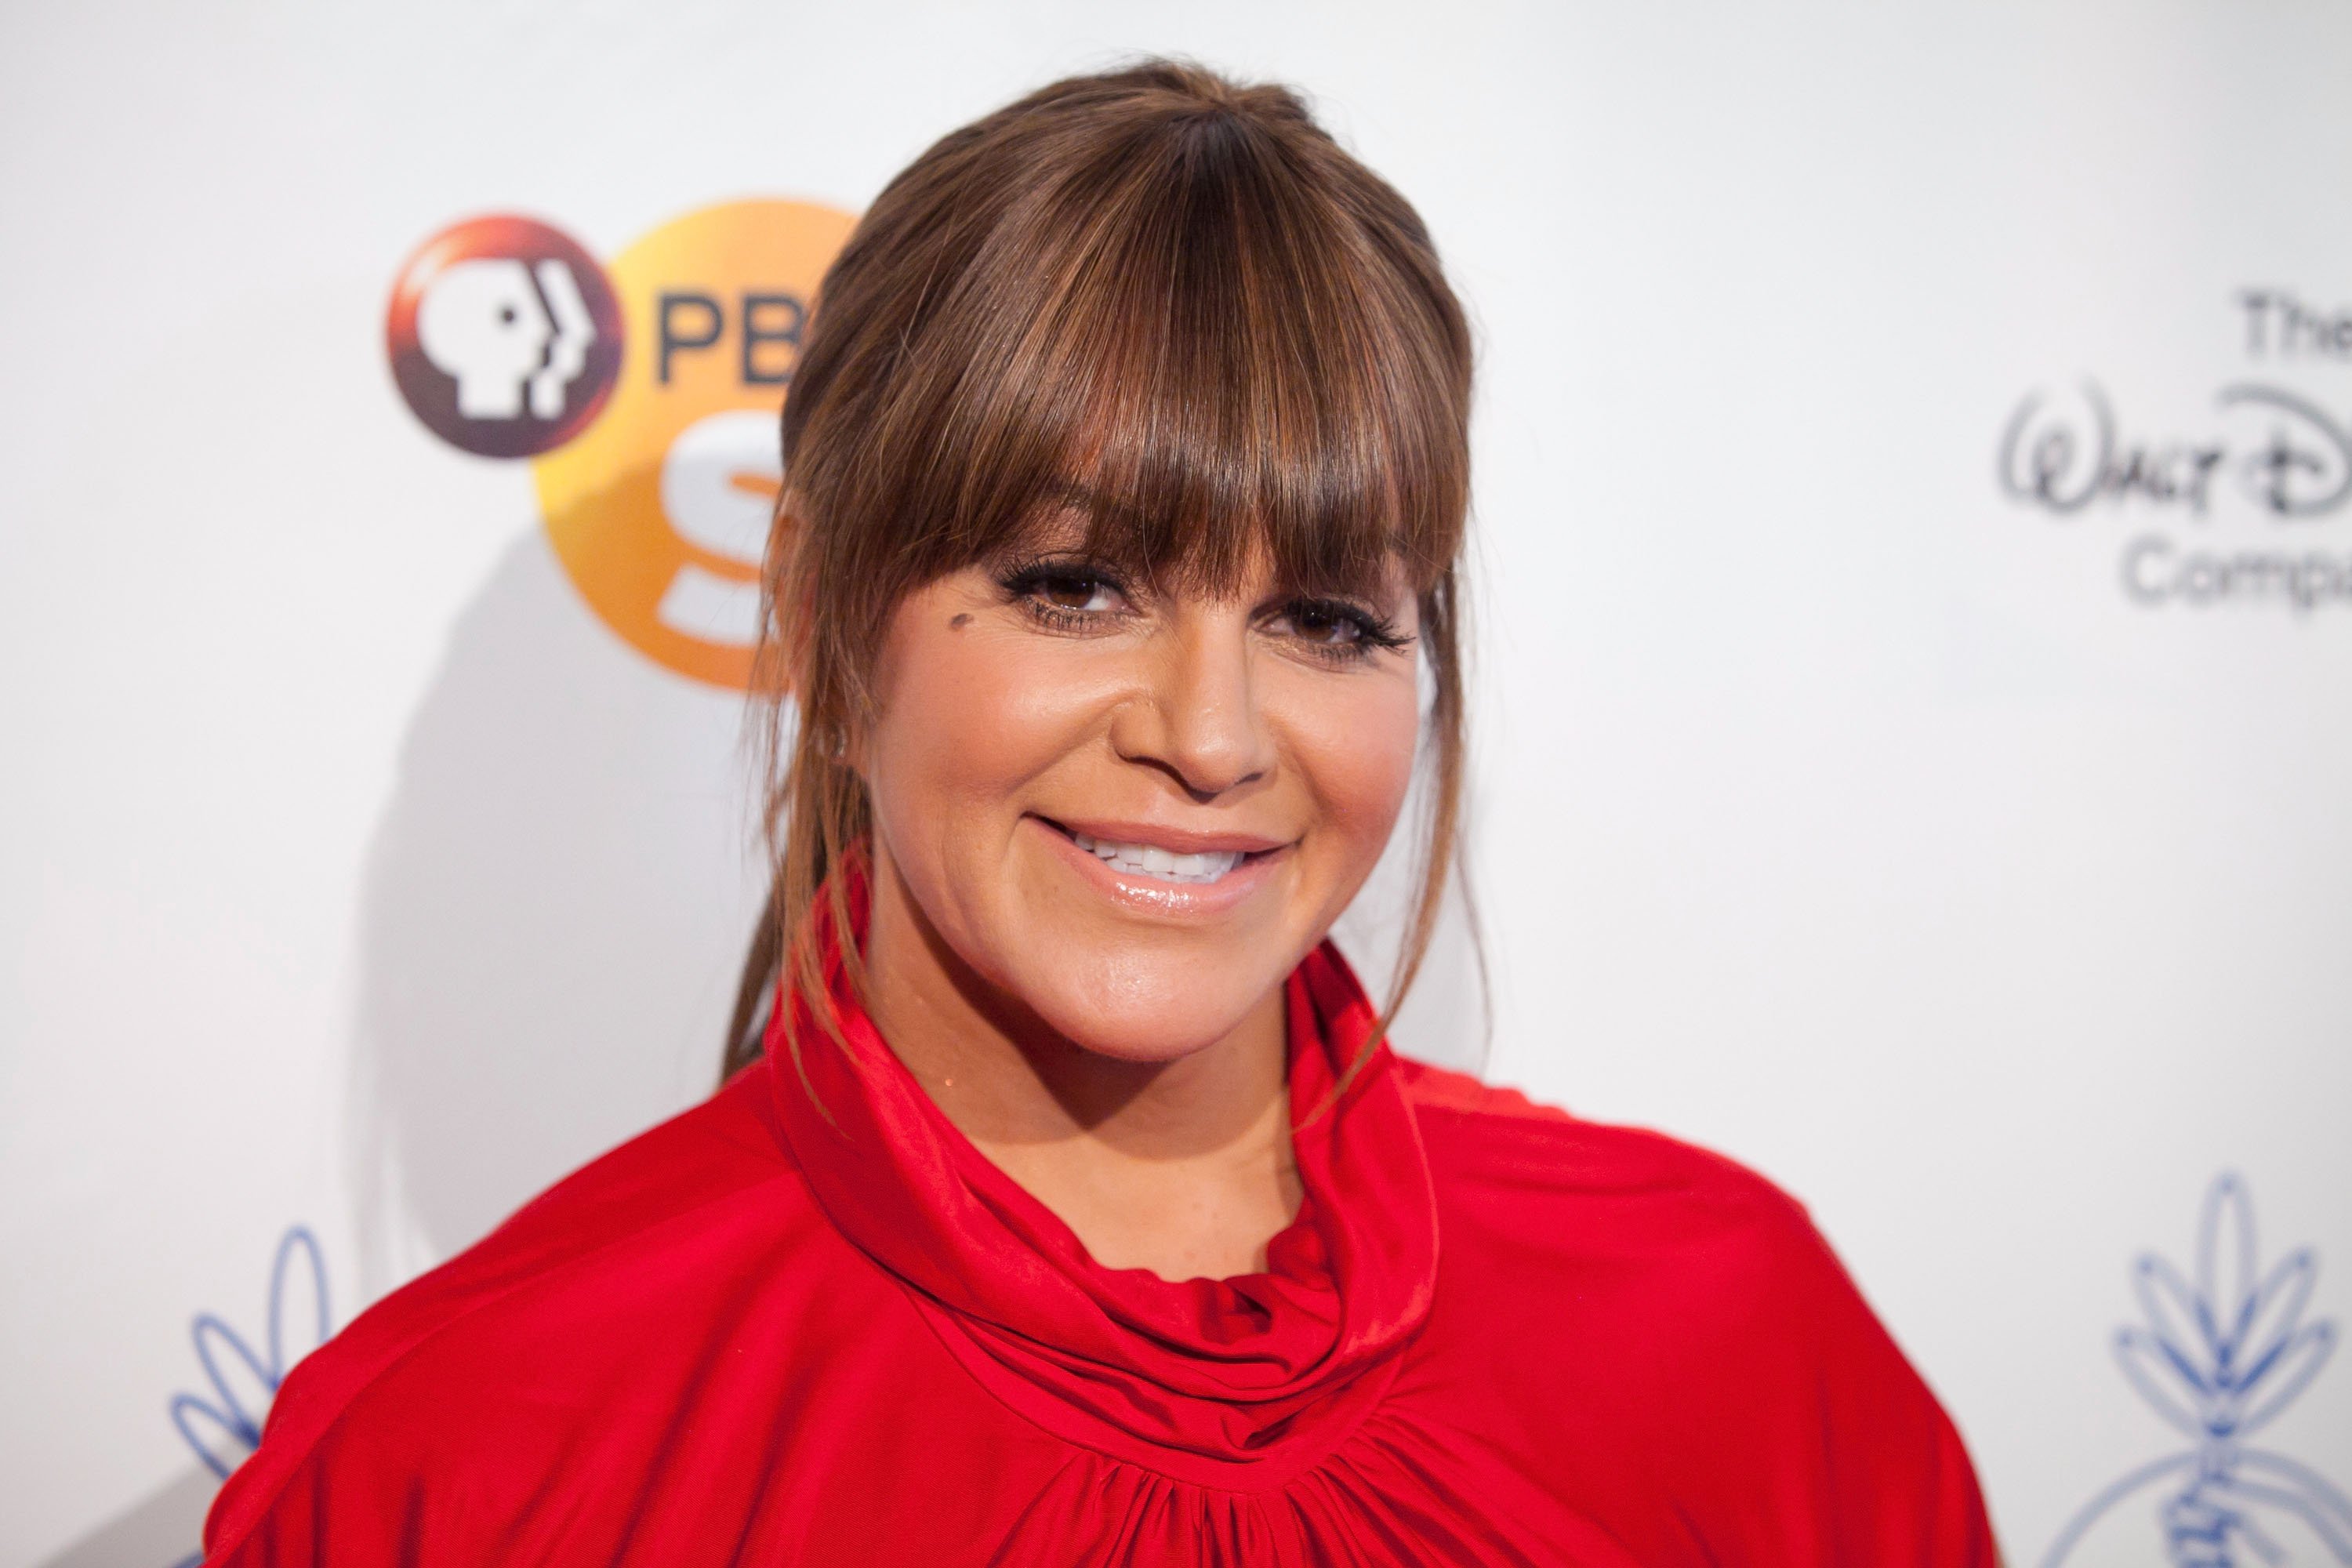 Jenni Rivera at the 27th Annual Imagen Awards on August 10, 2012 | Source: Getty Images